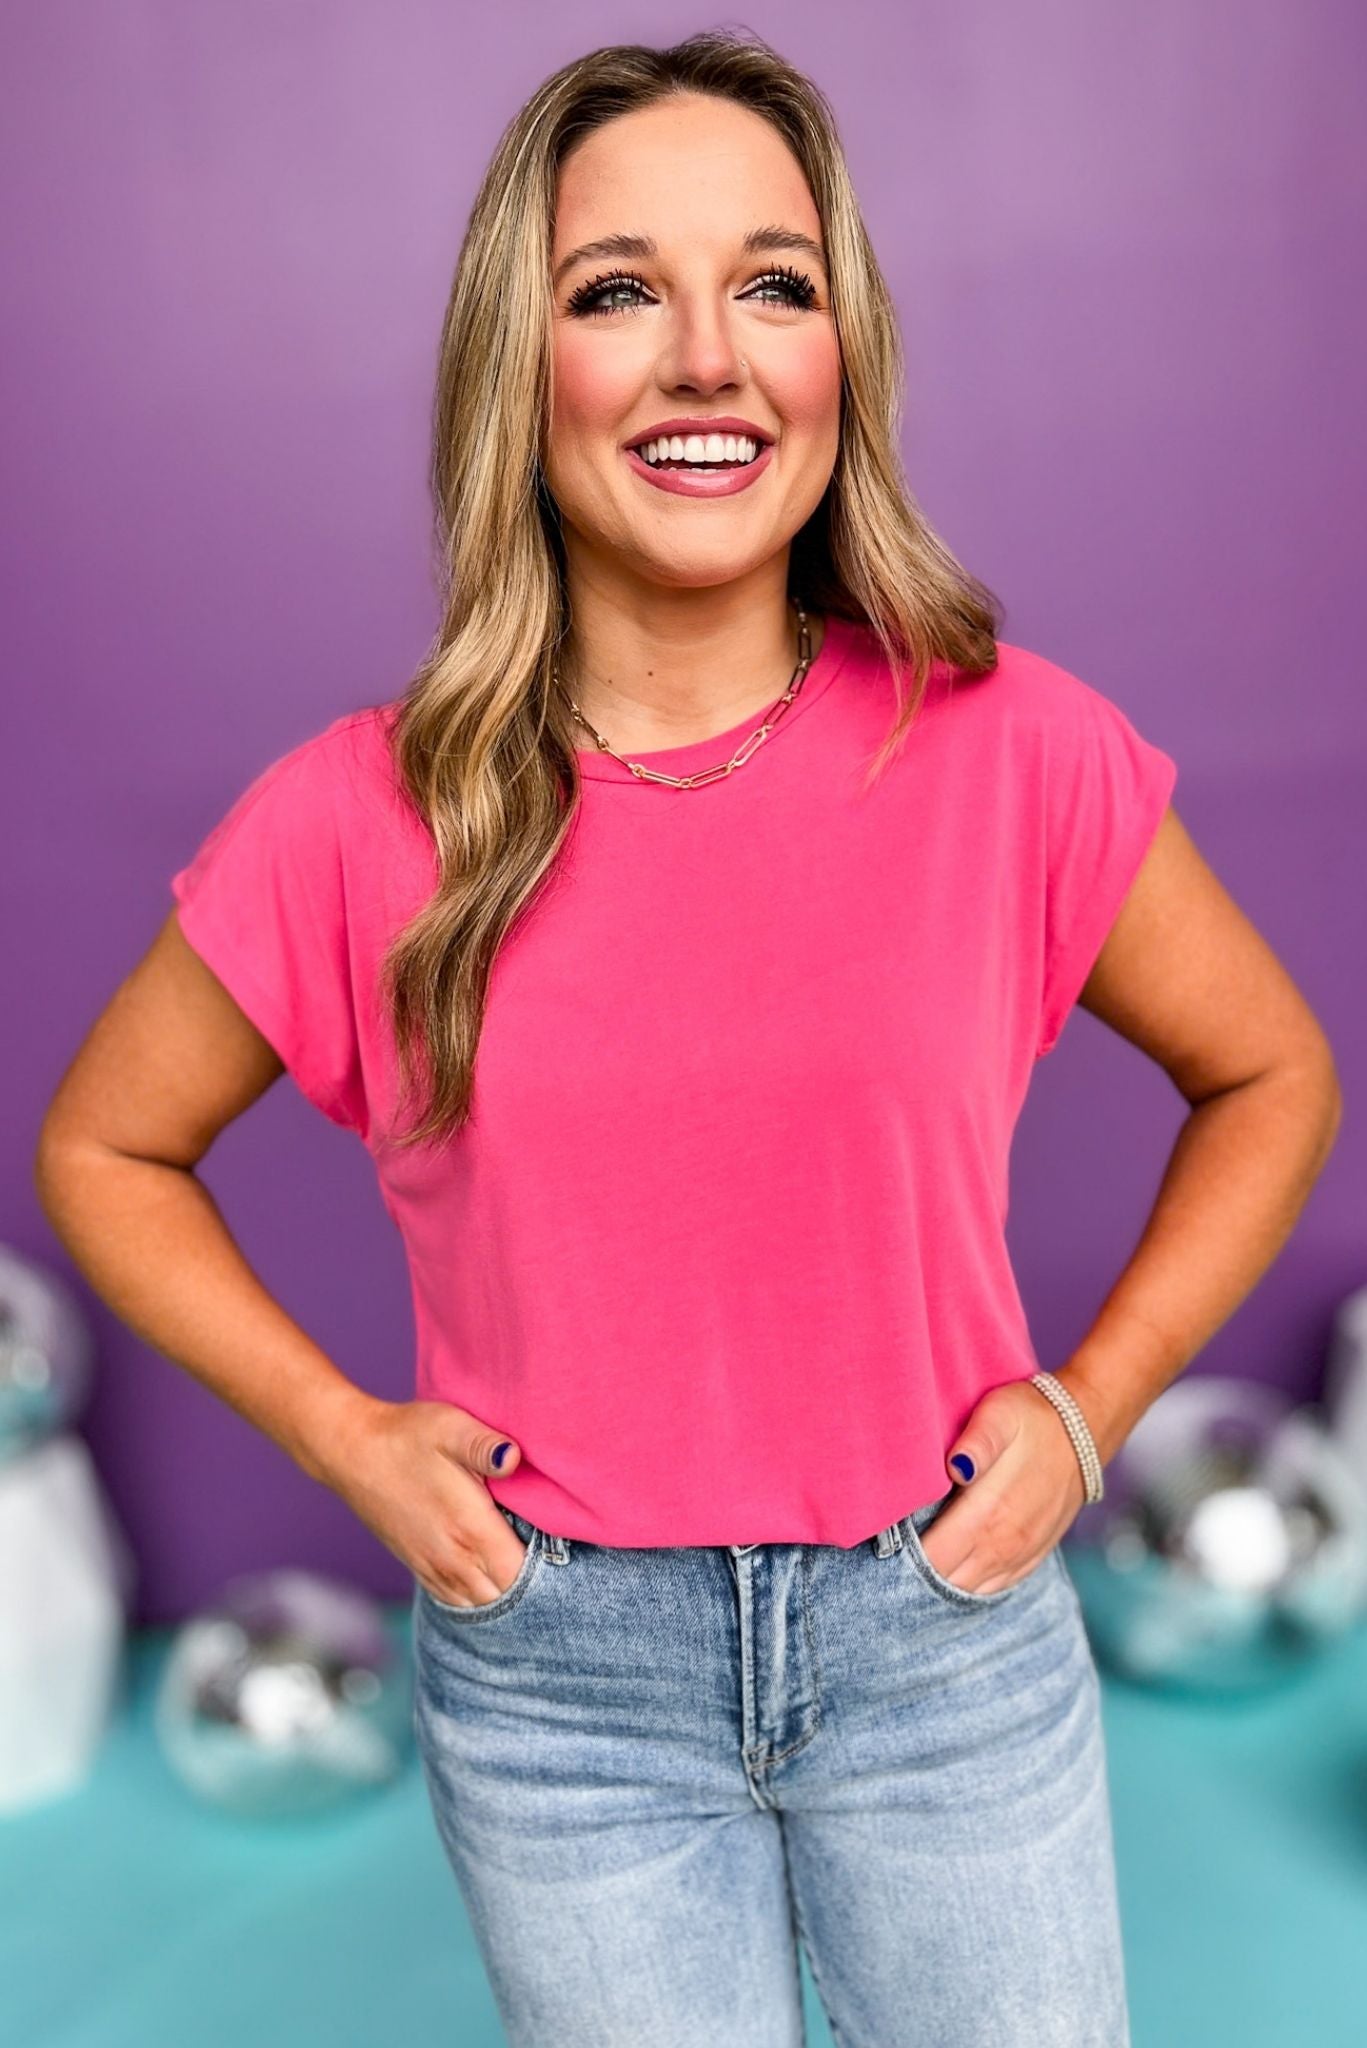 must have shirt, must have style, elevated tshirt, short sleeve shirt, elevated top, comfortable style, mom style, casual style, shop style your senses by Mallory Fitzsimmons, says by Mallory Fitzsimmons